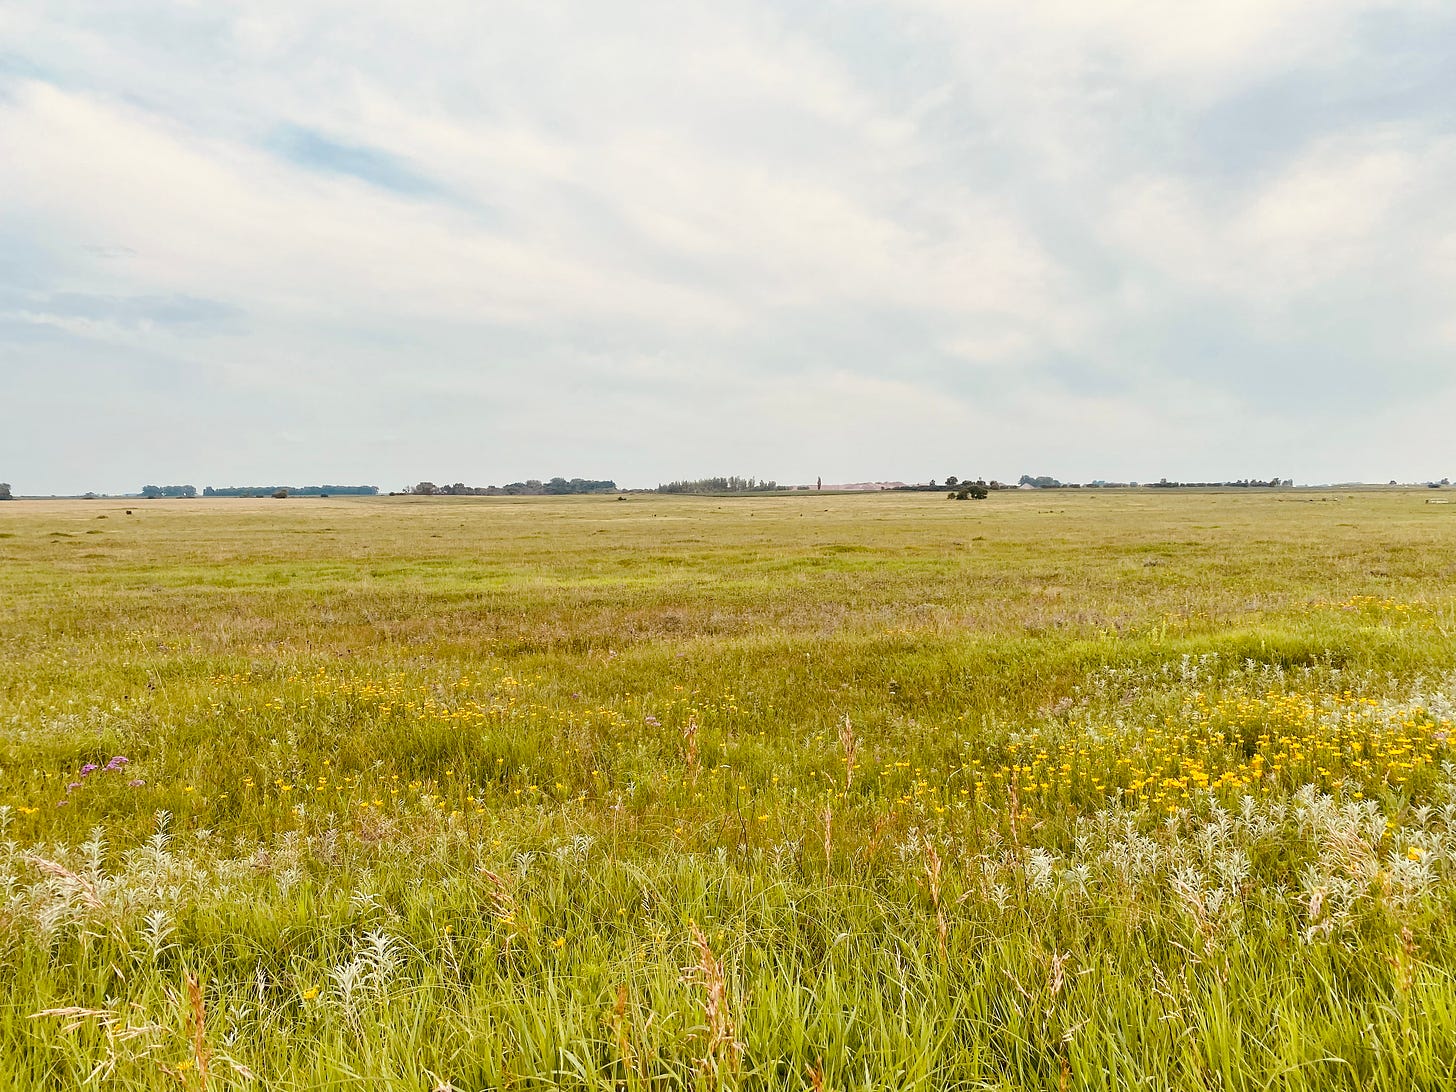 A photo of the prairie with several different flowers and some clusters of trees in the distance, bordering farmlands